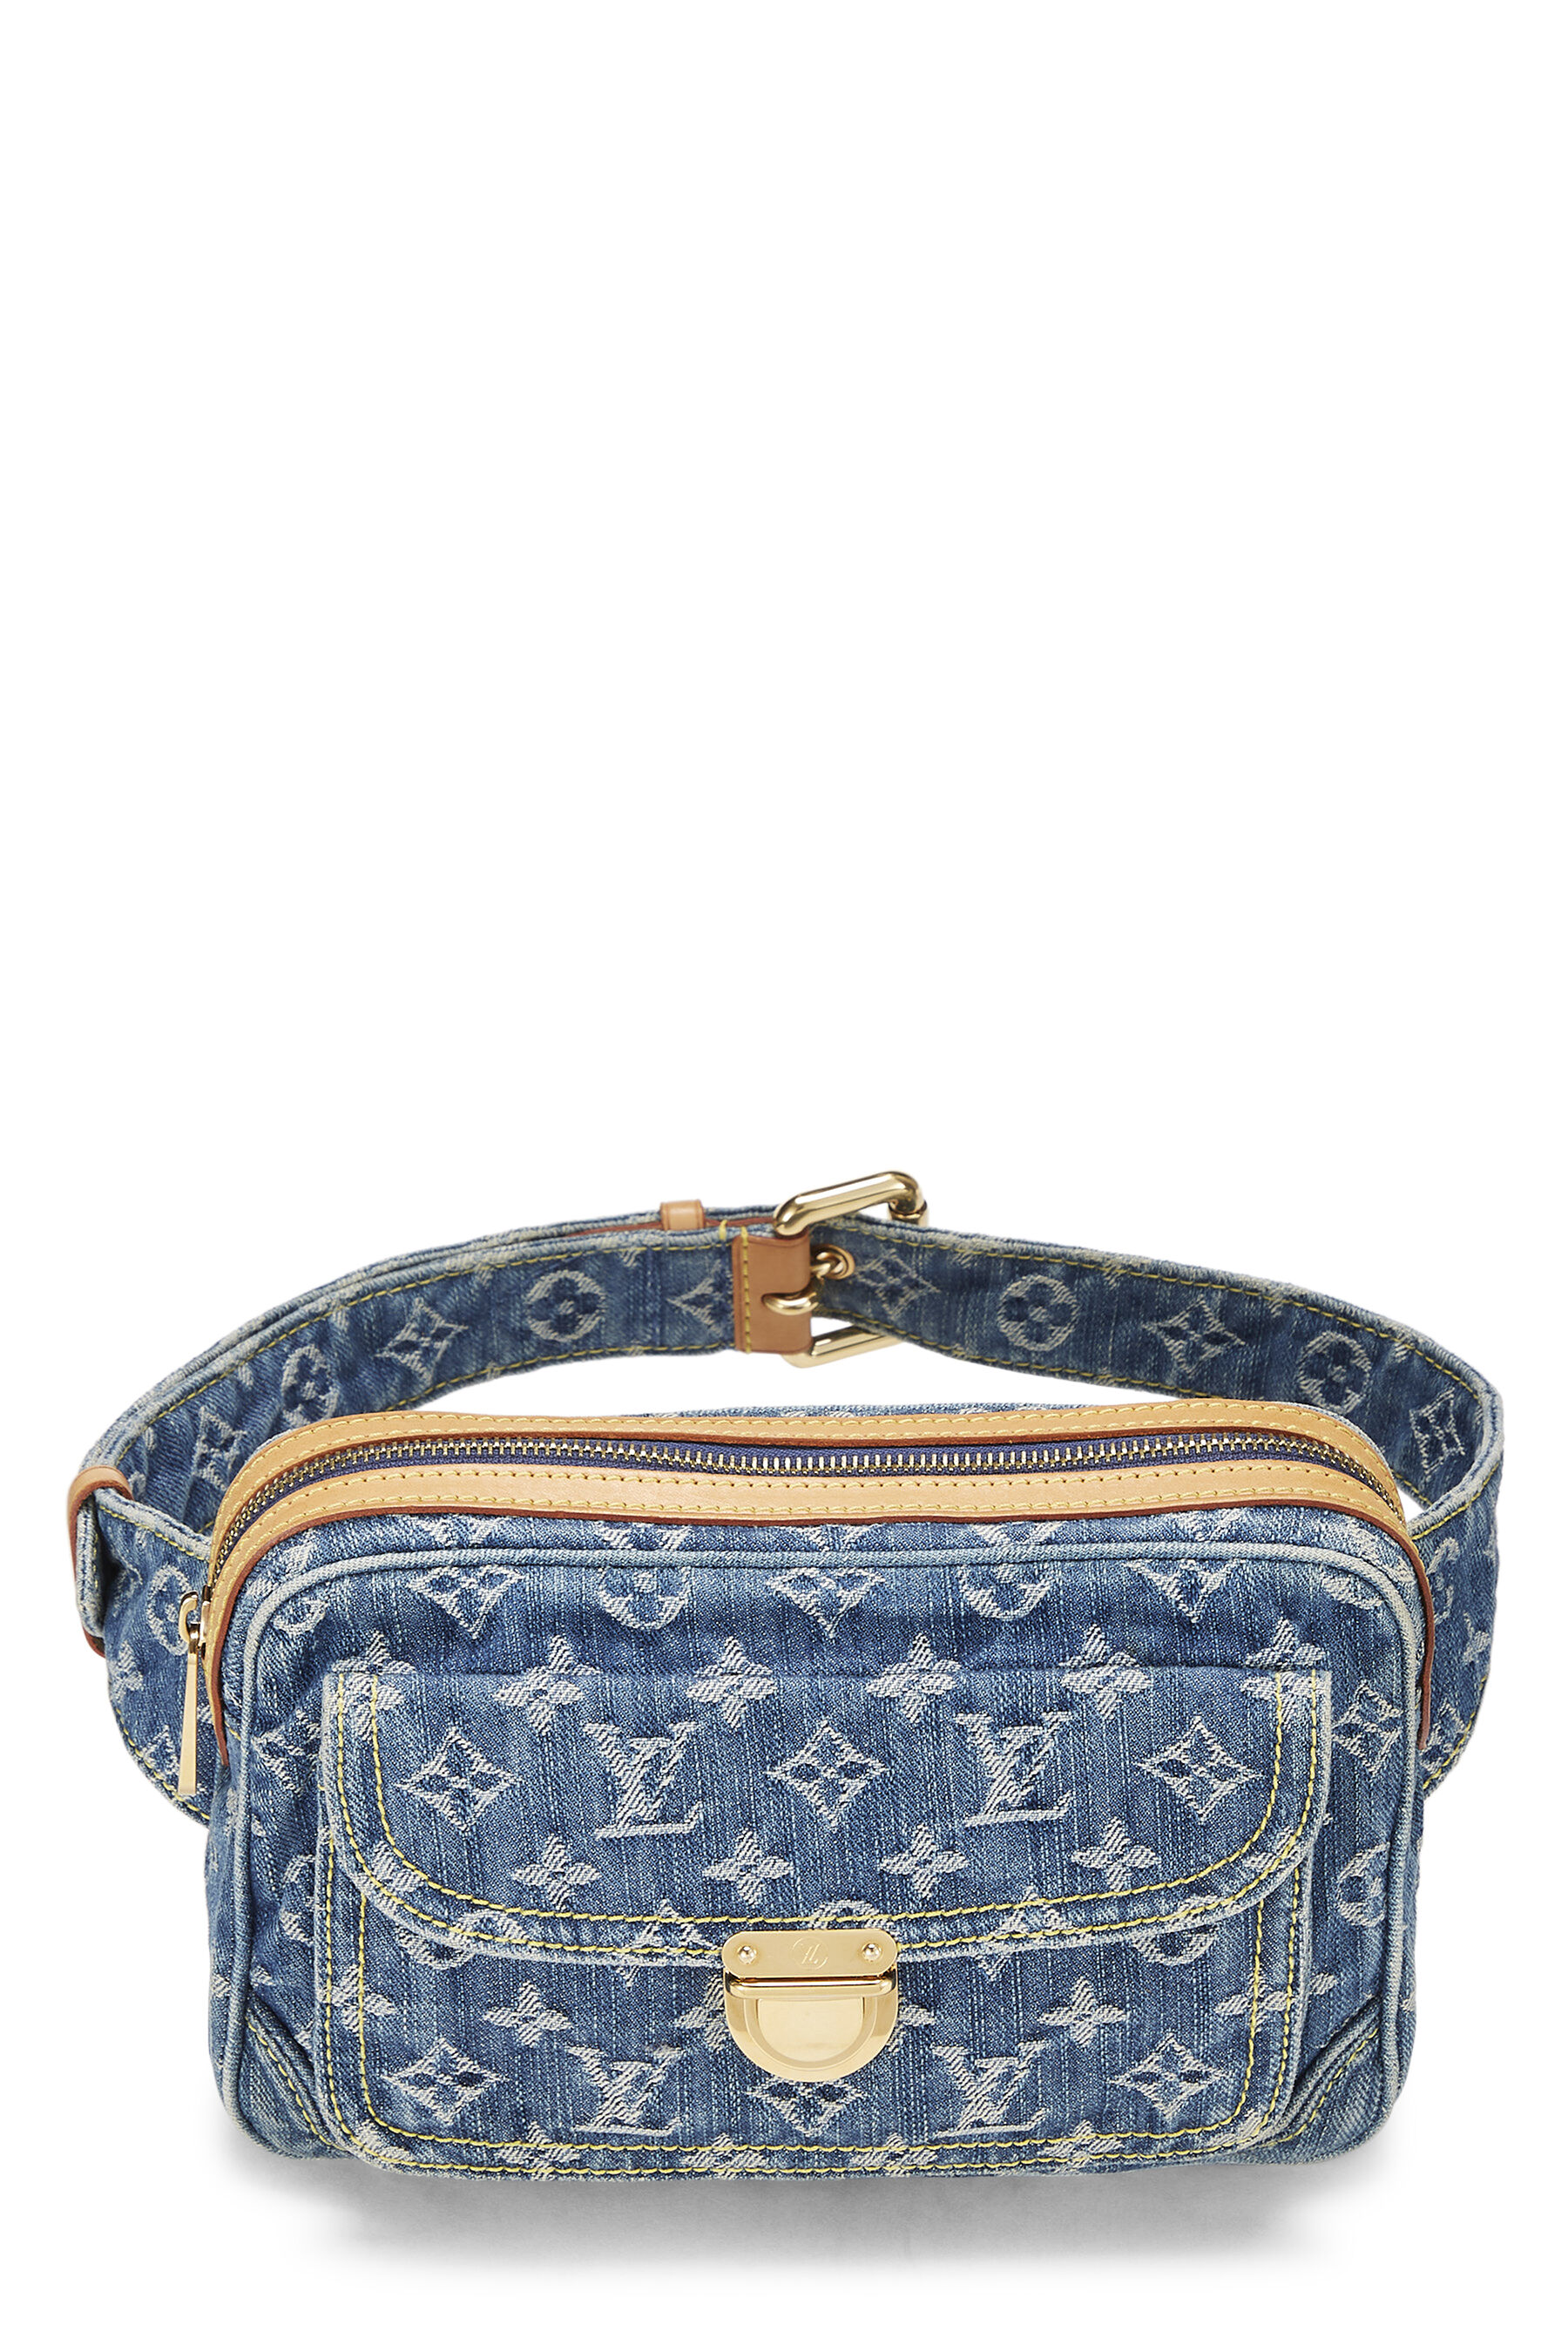 Louis Vuitton Outdoor Bumbag Denim in Coated Canvas/Cowhide